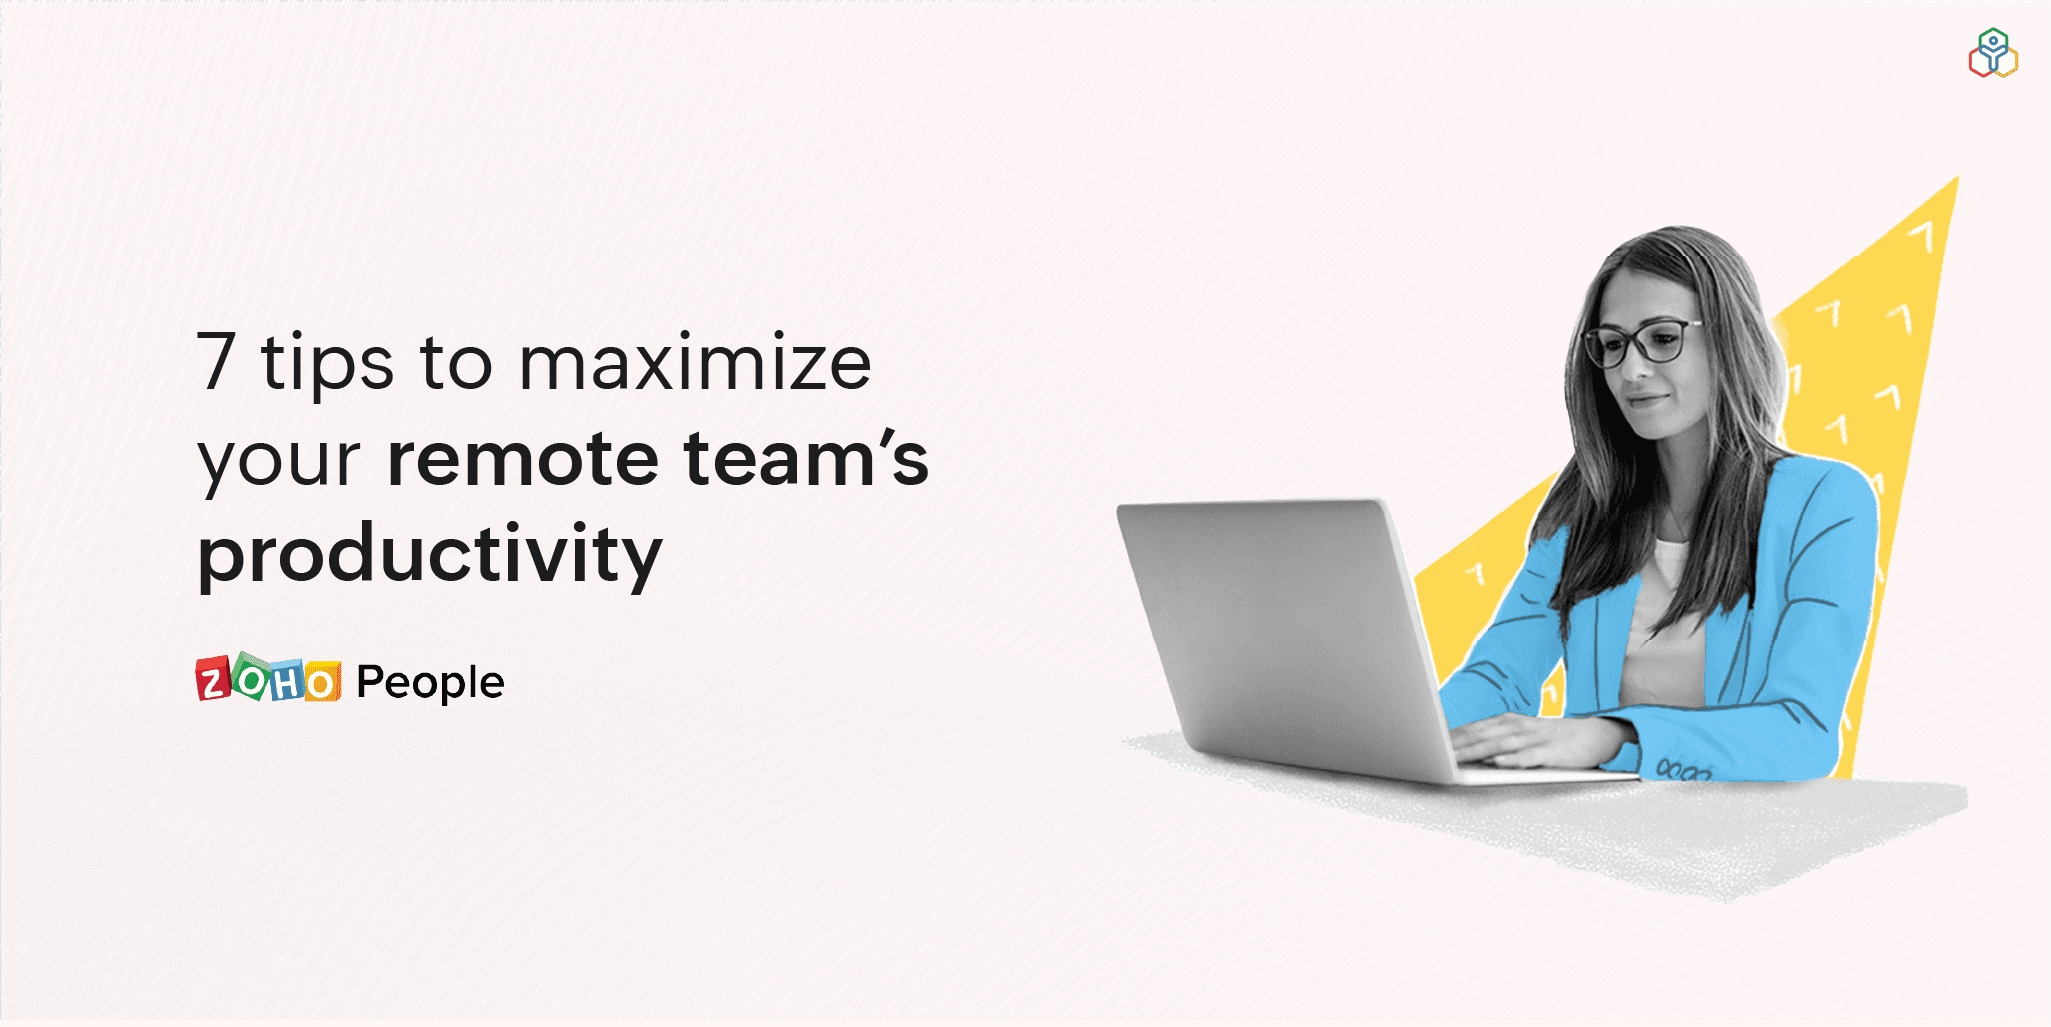 7 ways to increase your remote team's productivity